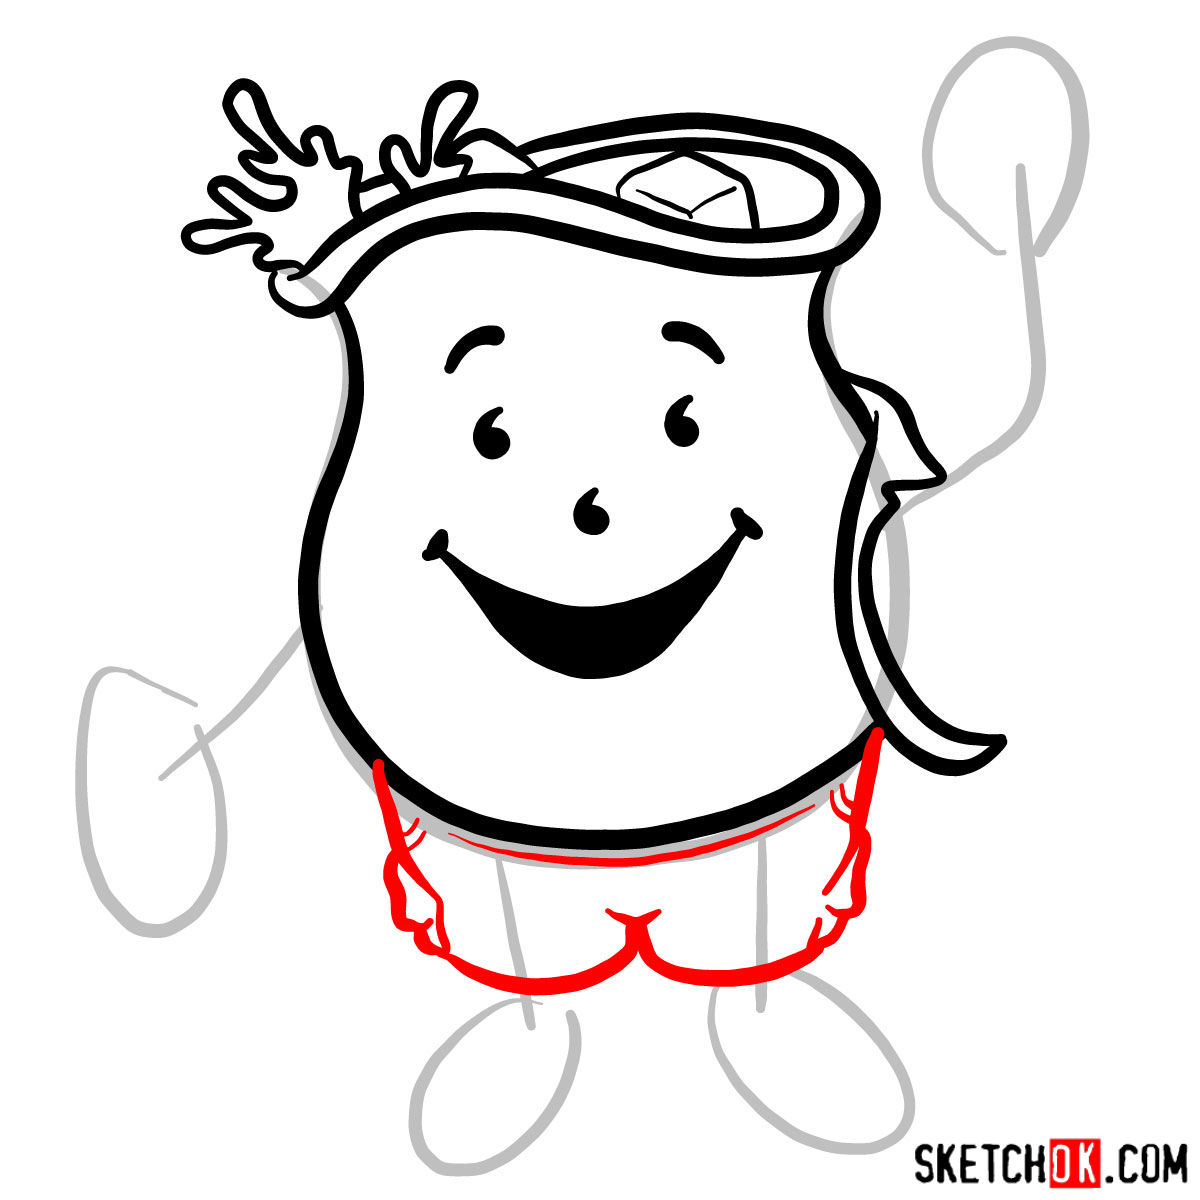 How to draw Kool-Aid Man - Sketchok easy drawing guides